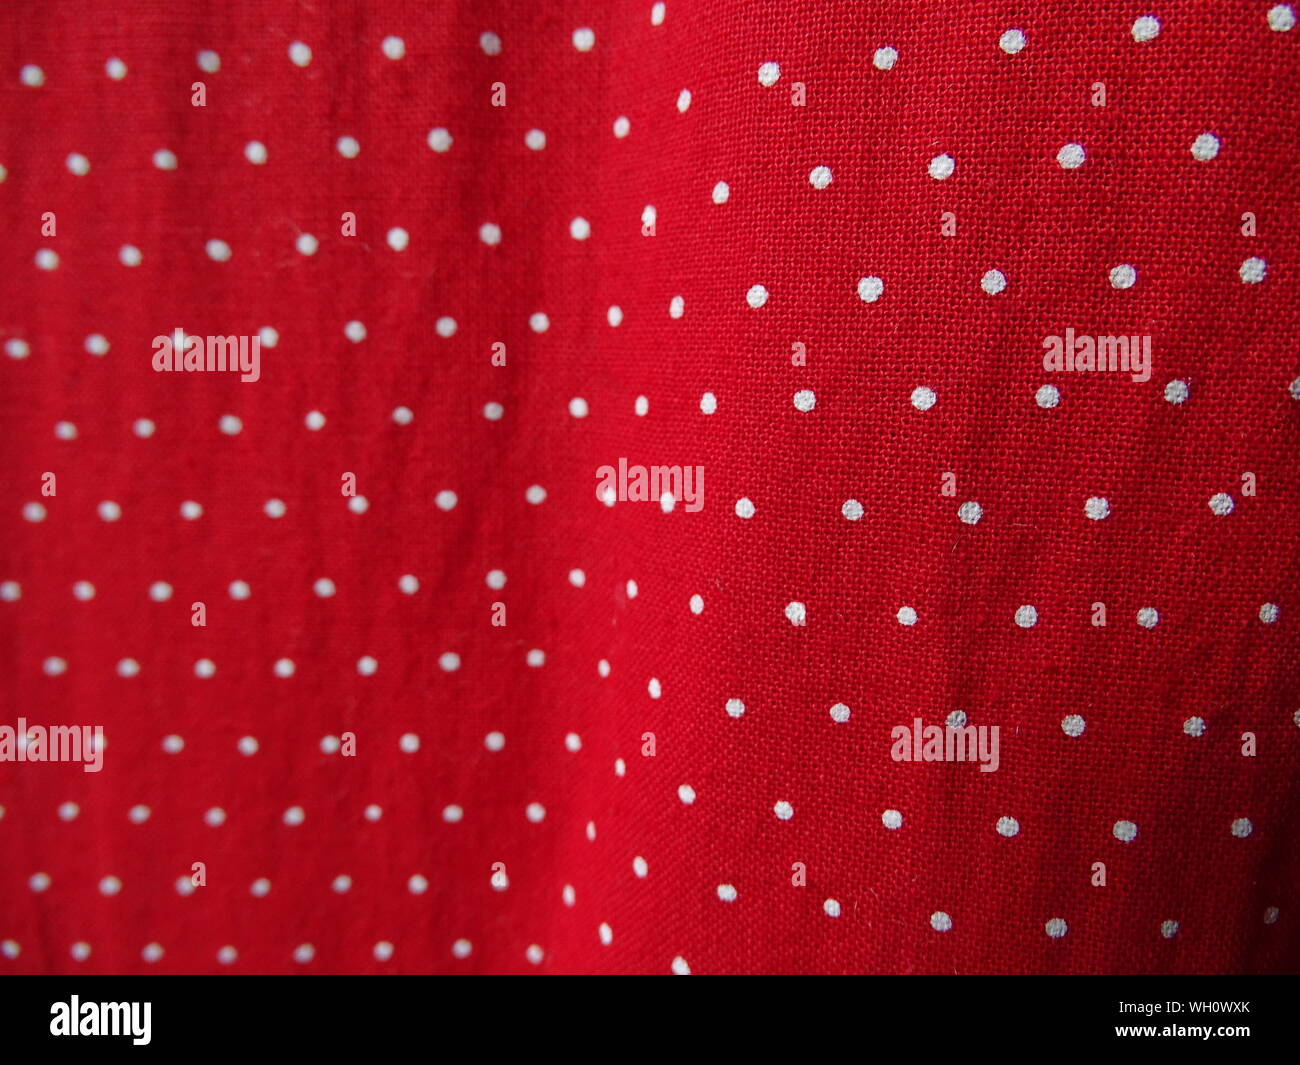 Full Frame Shot Of Red Fabric With White Spots Stock Photo